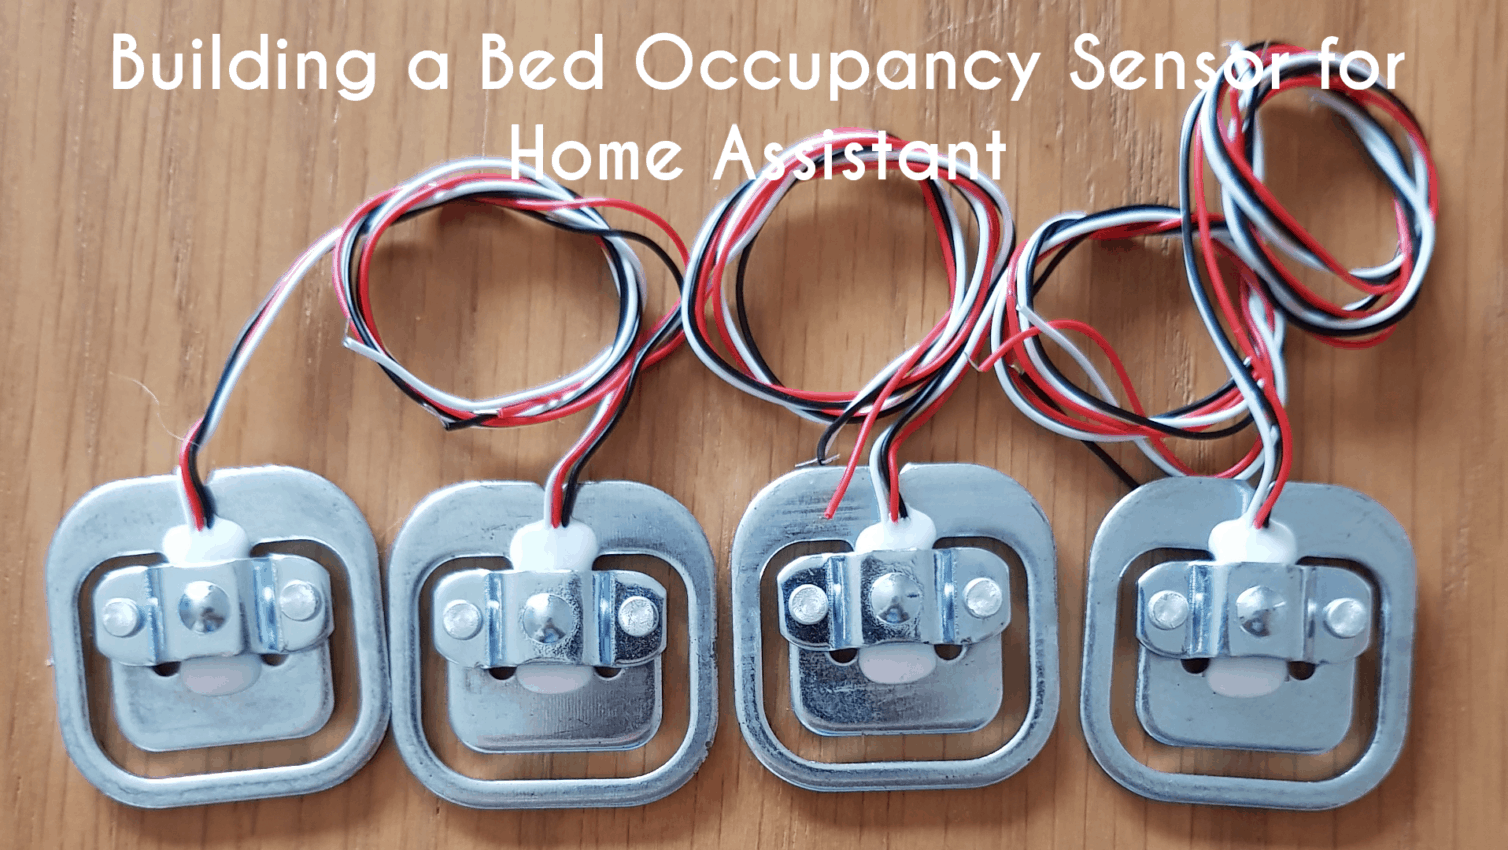 Building a bed occupancy sensor for Home Assistant